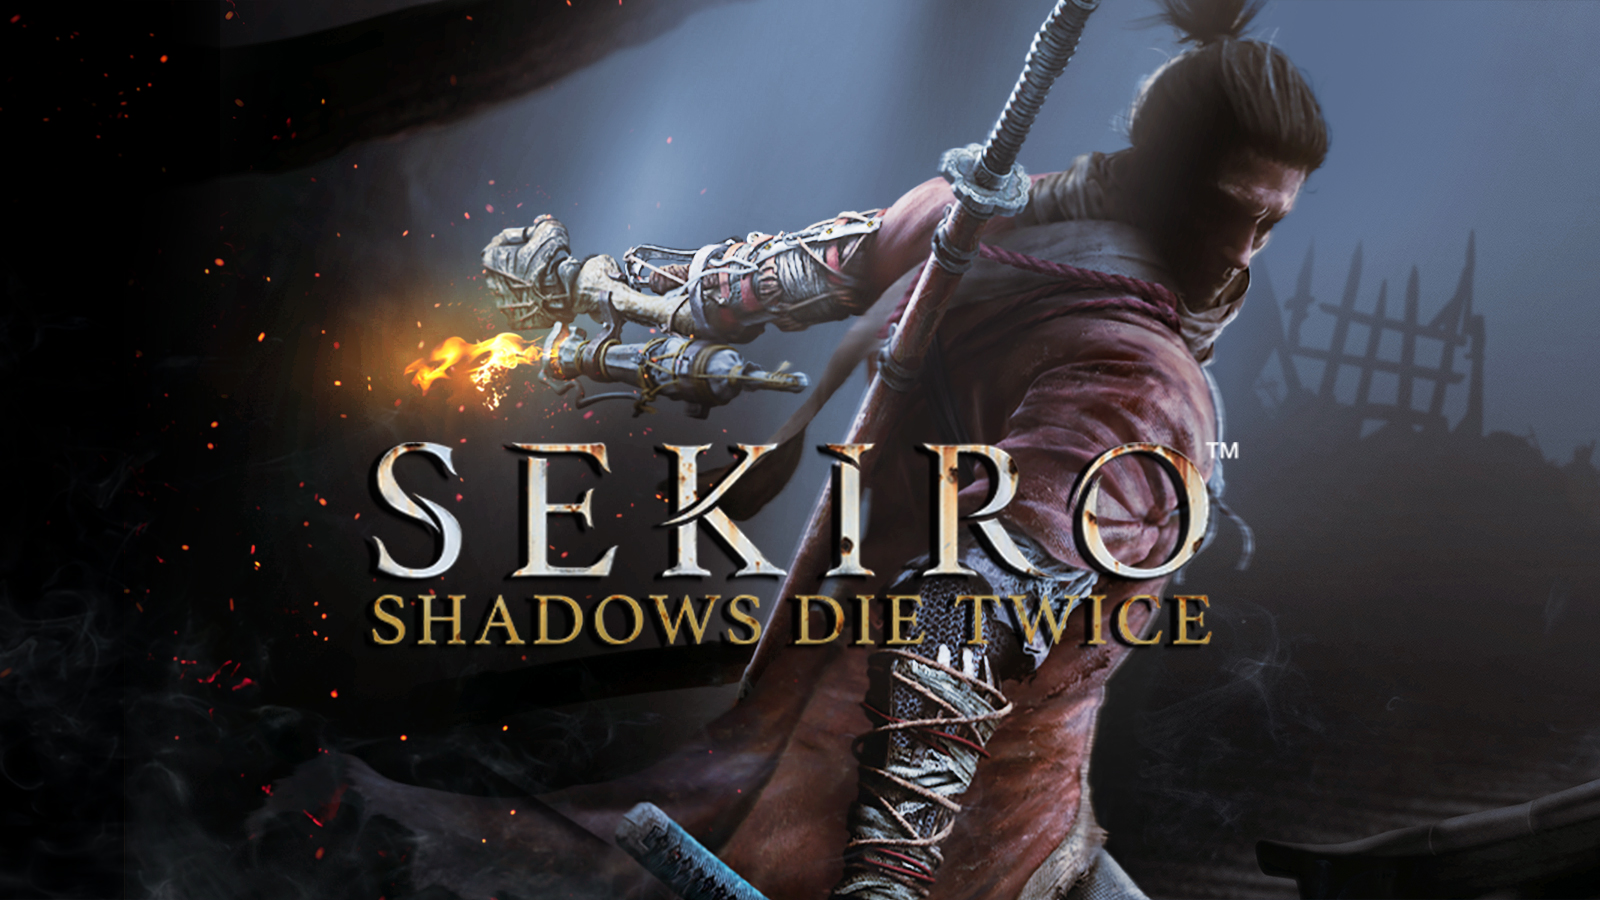 sekiro-shadows-die-twice-launches-worldwide-on-march-22nd-2019-the